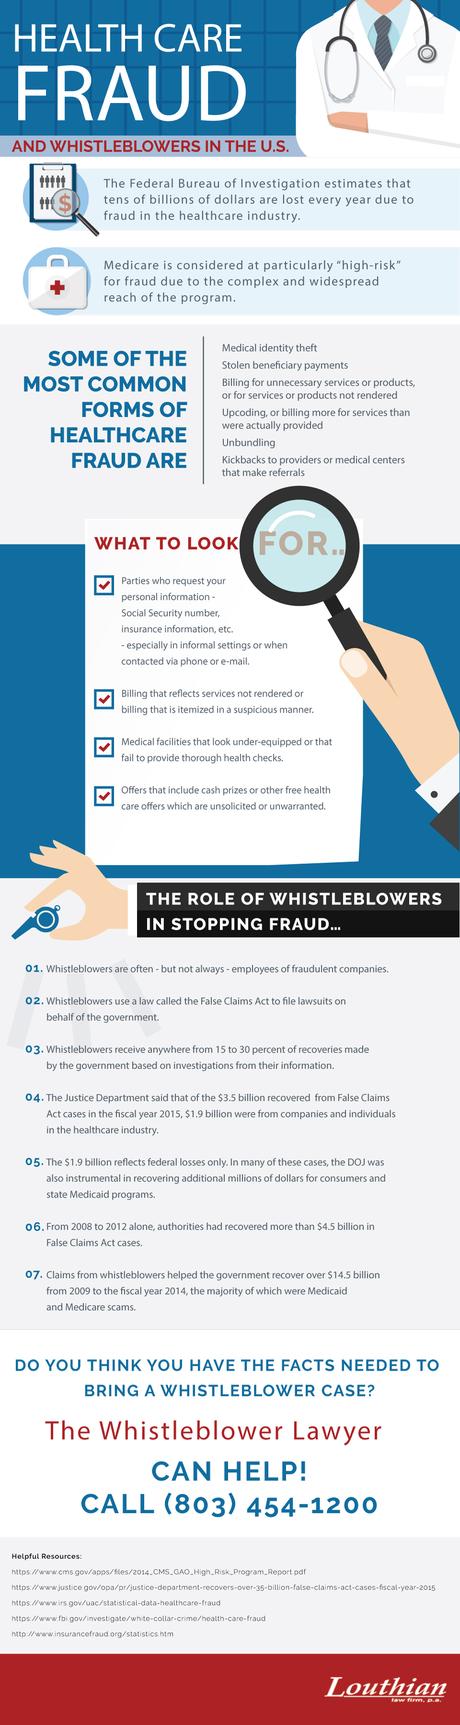 Healthcare Fraud and Whistleblowers in the U.S. infographic